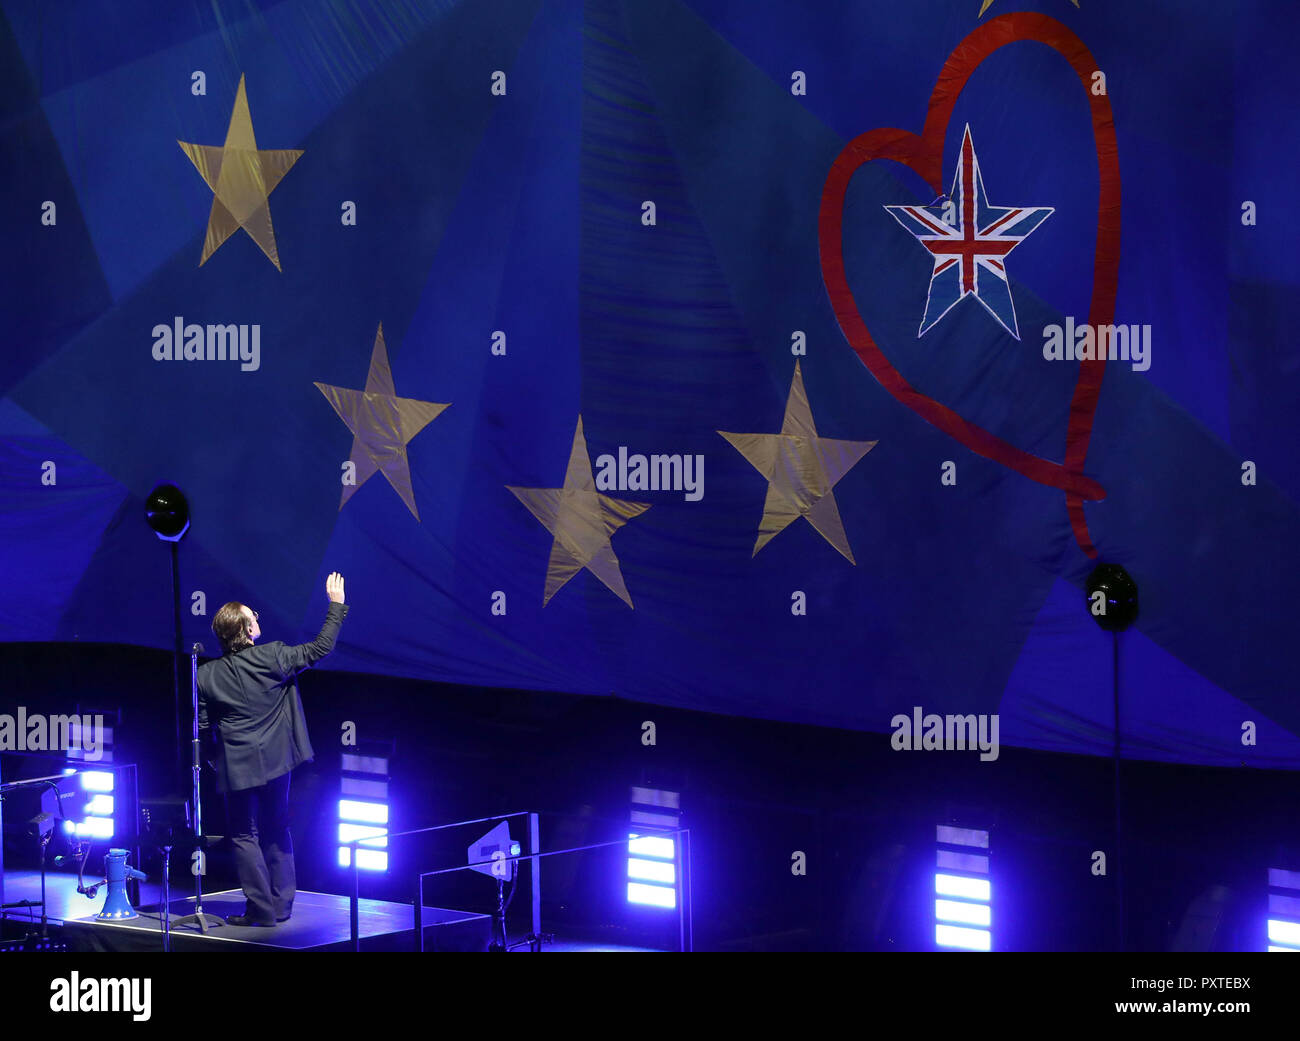 U2's Bono waves to a giant EU flag, with one star as the Union Flag, at the o2 Arena in London, during their eXPERIENCE + iNNOCENCE Tour. Stock Photo